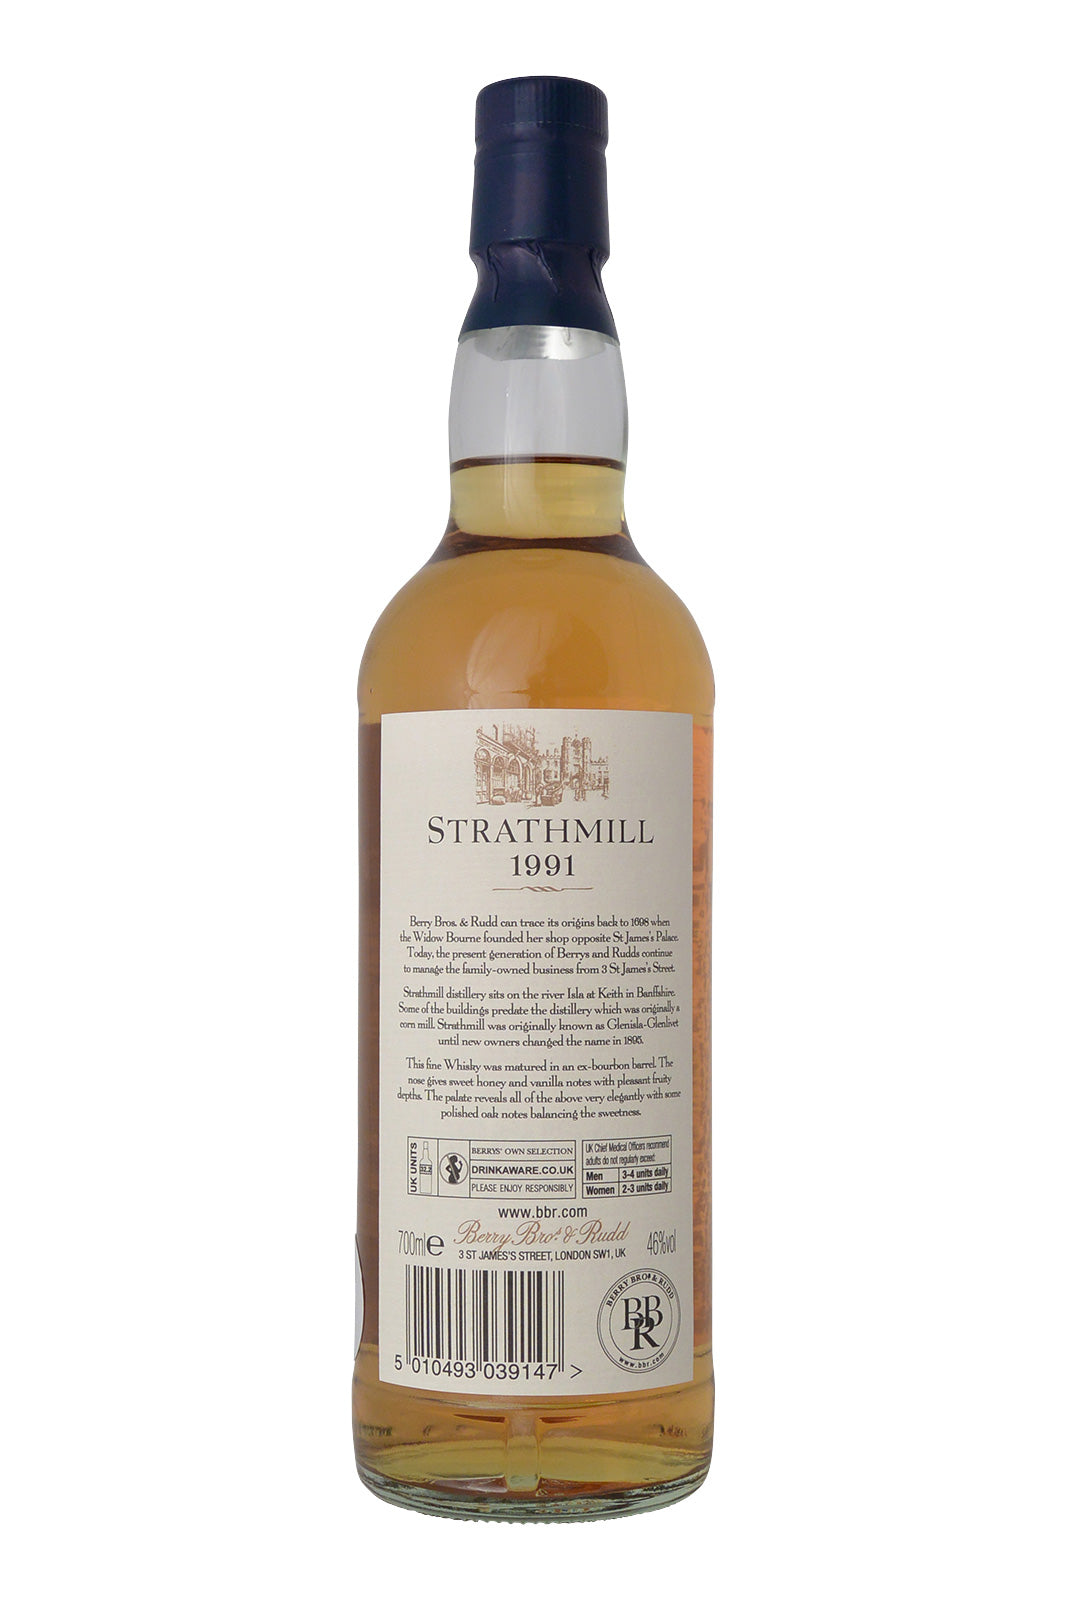 Strathmill 1991 Cask Ref. 2447 Berry's